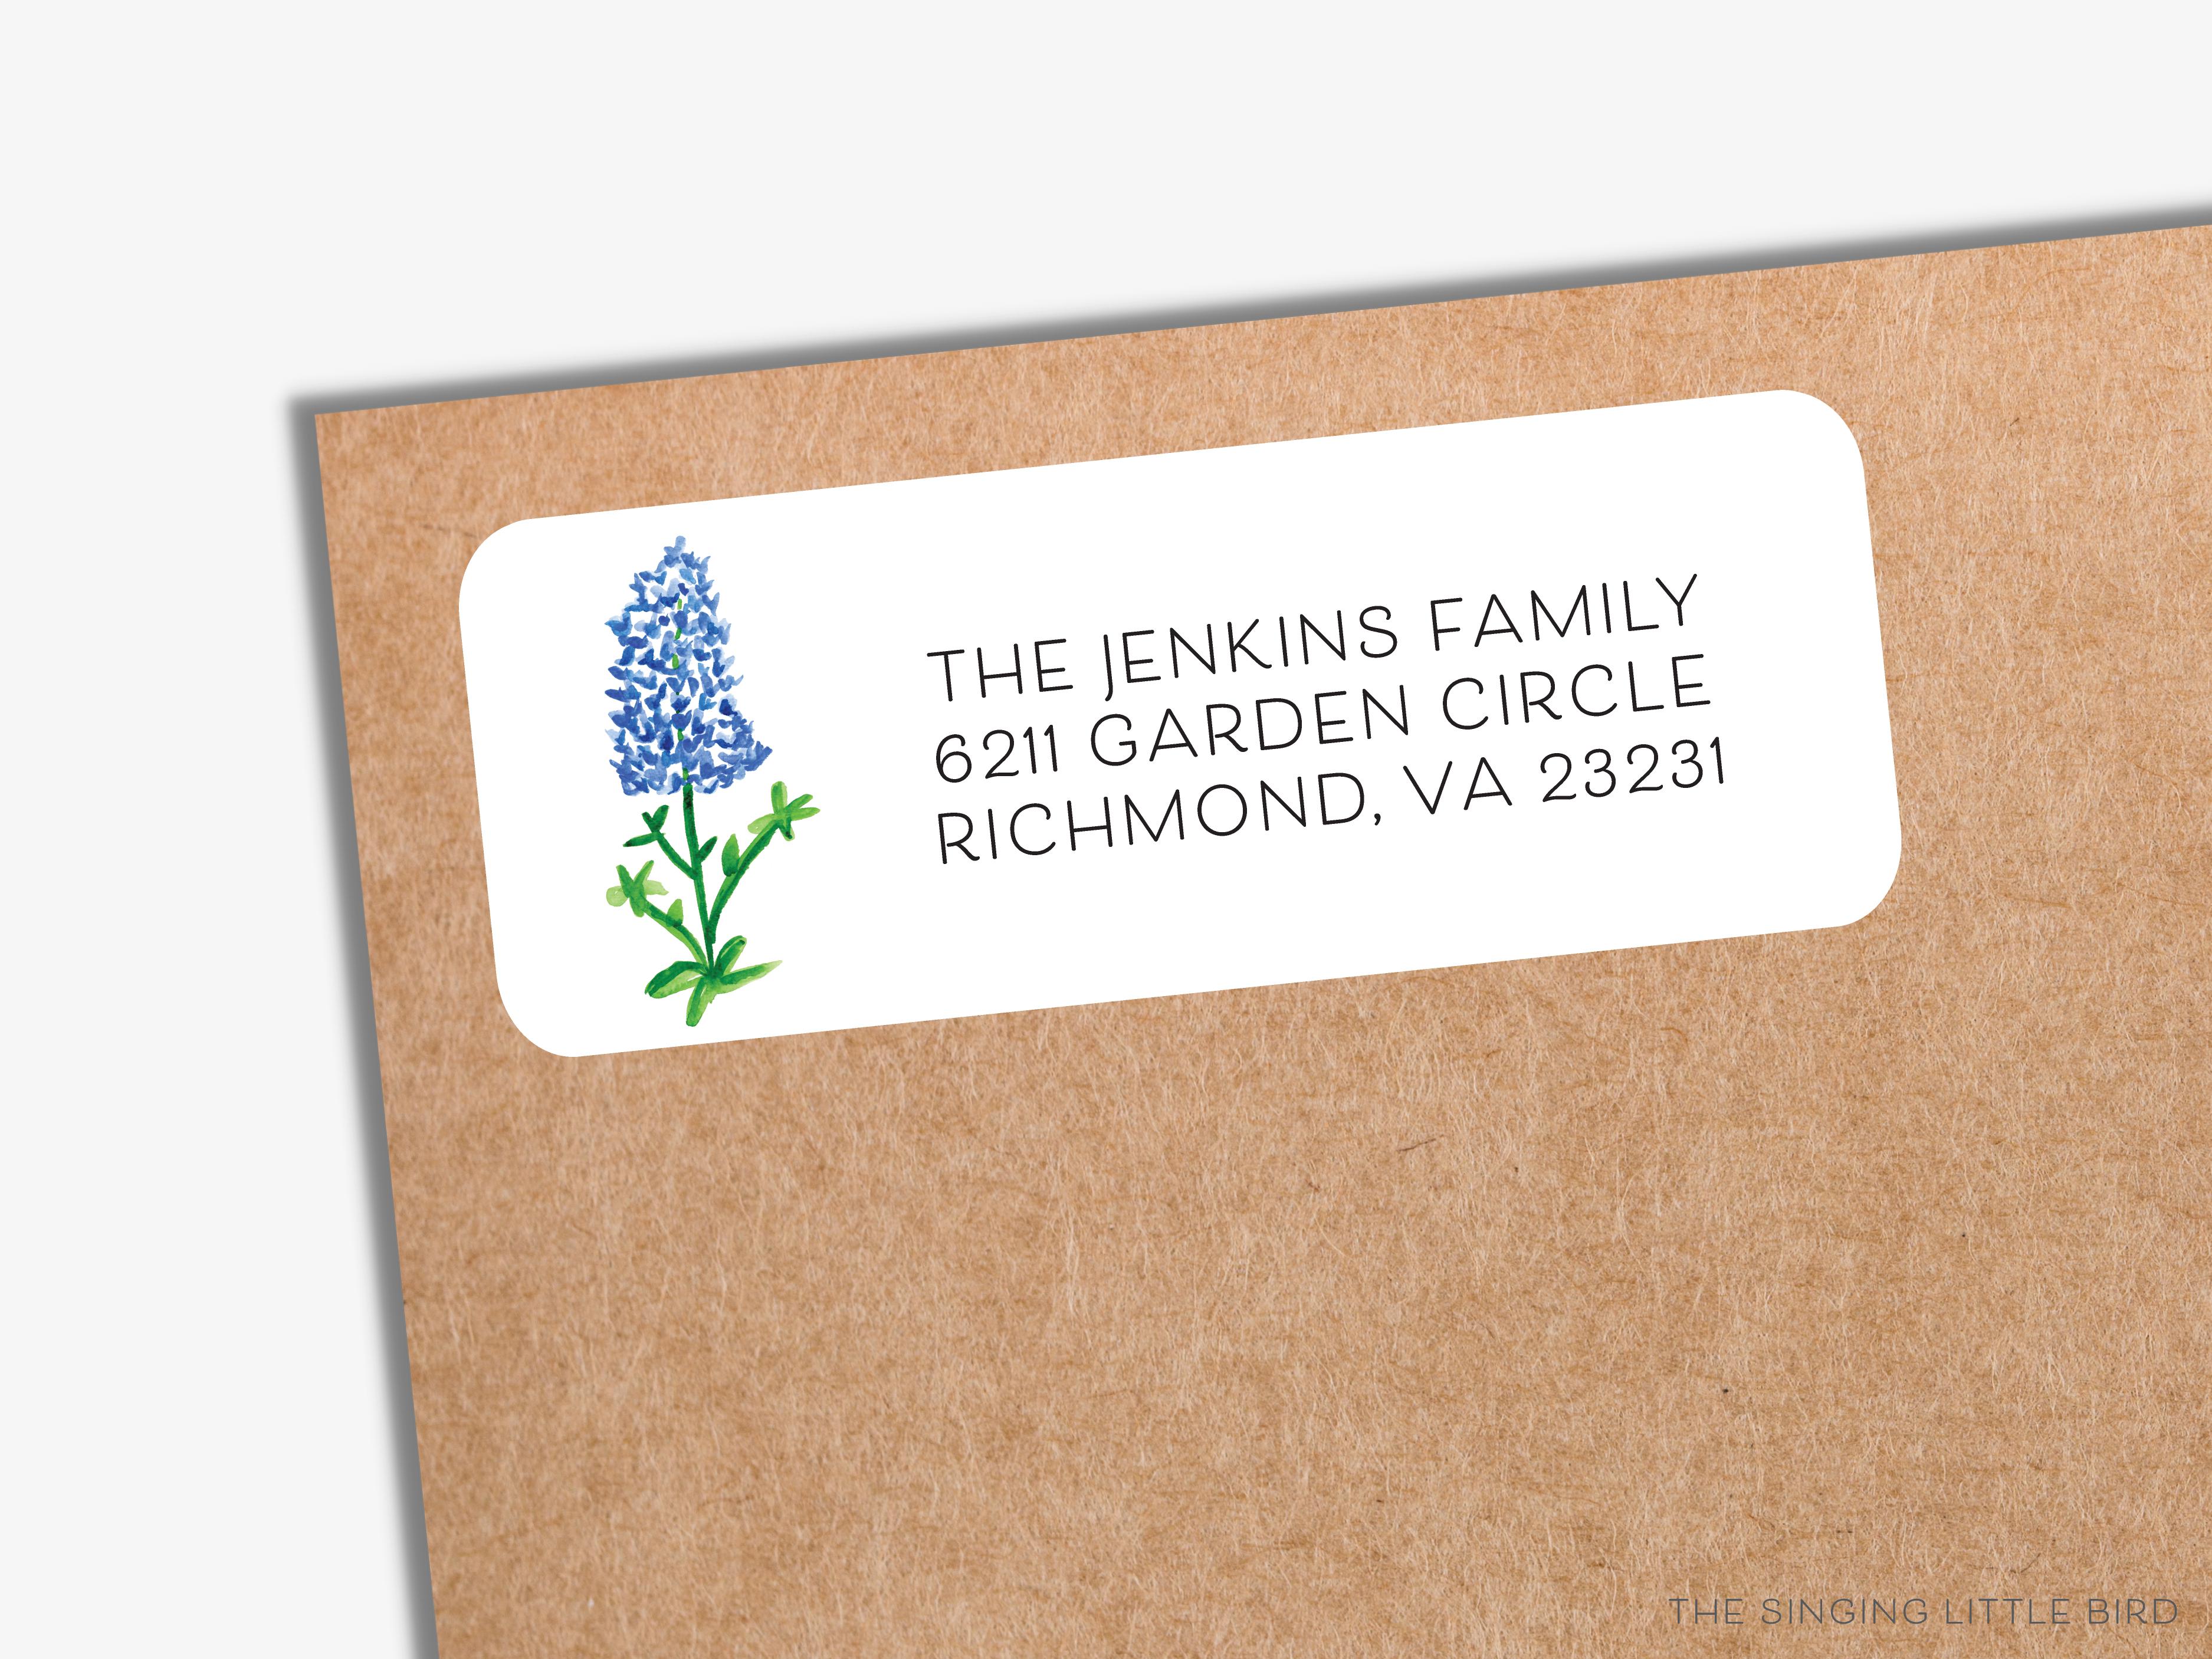 Texas Bluebonnet Return Address Labels-These personalized return address labels are 2.625" x 1" and feature our hand-painted watercolor Texas Bluebonnet, printed in the USA on beautiful matte finish labels. These make great gifts for yourself or the flower lover.-The Singing Little Bird